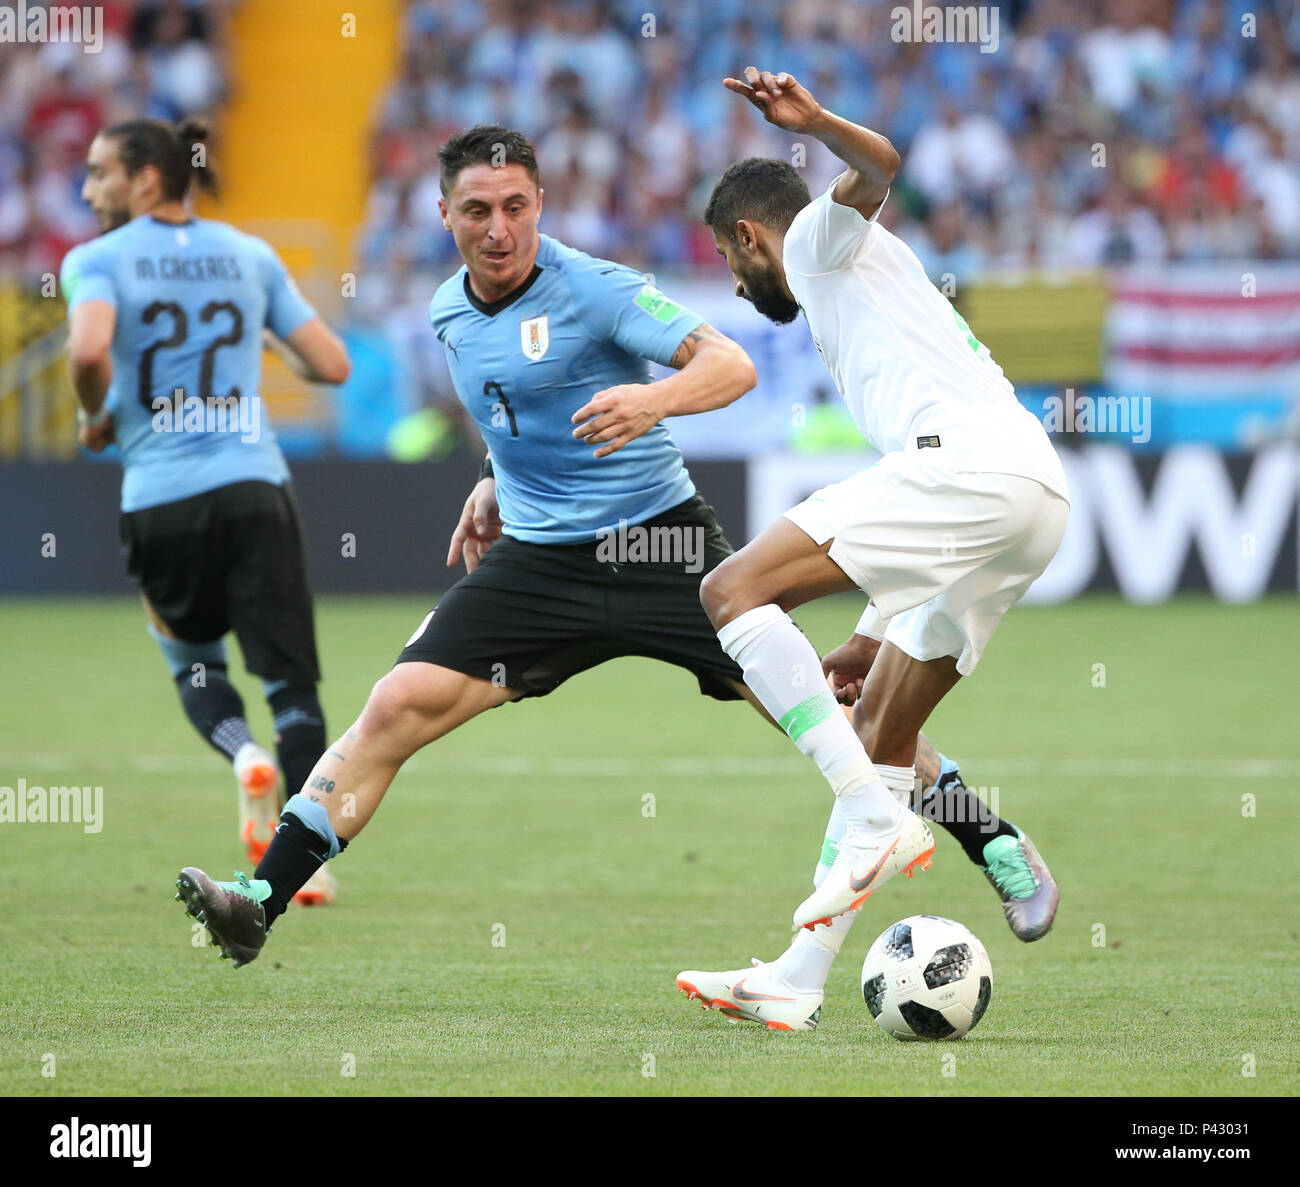 Rostov On Don. 20th June, 2018. Cristian Rodriguez (L front) of Uruguay vies with Salman Alfaraj (R) of Saudi Arabia during a Group A match between Uruguay and Saudi Arabia at the 2018 FIFA World Cup in Rostov-on-Don, Russia, June 20, 2018. Credit: Li Ming/Xinhua/Alamy Live News Stock Photo